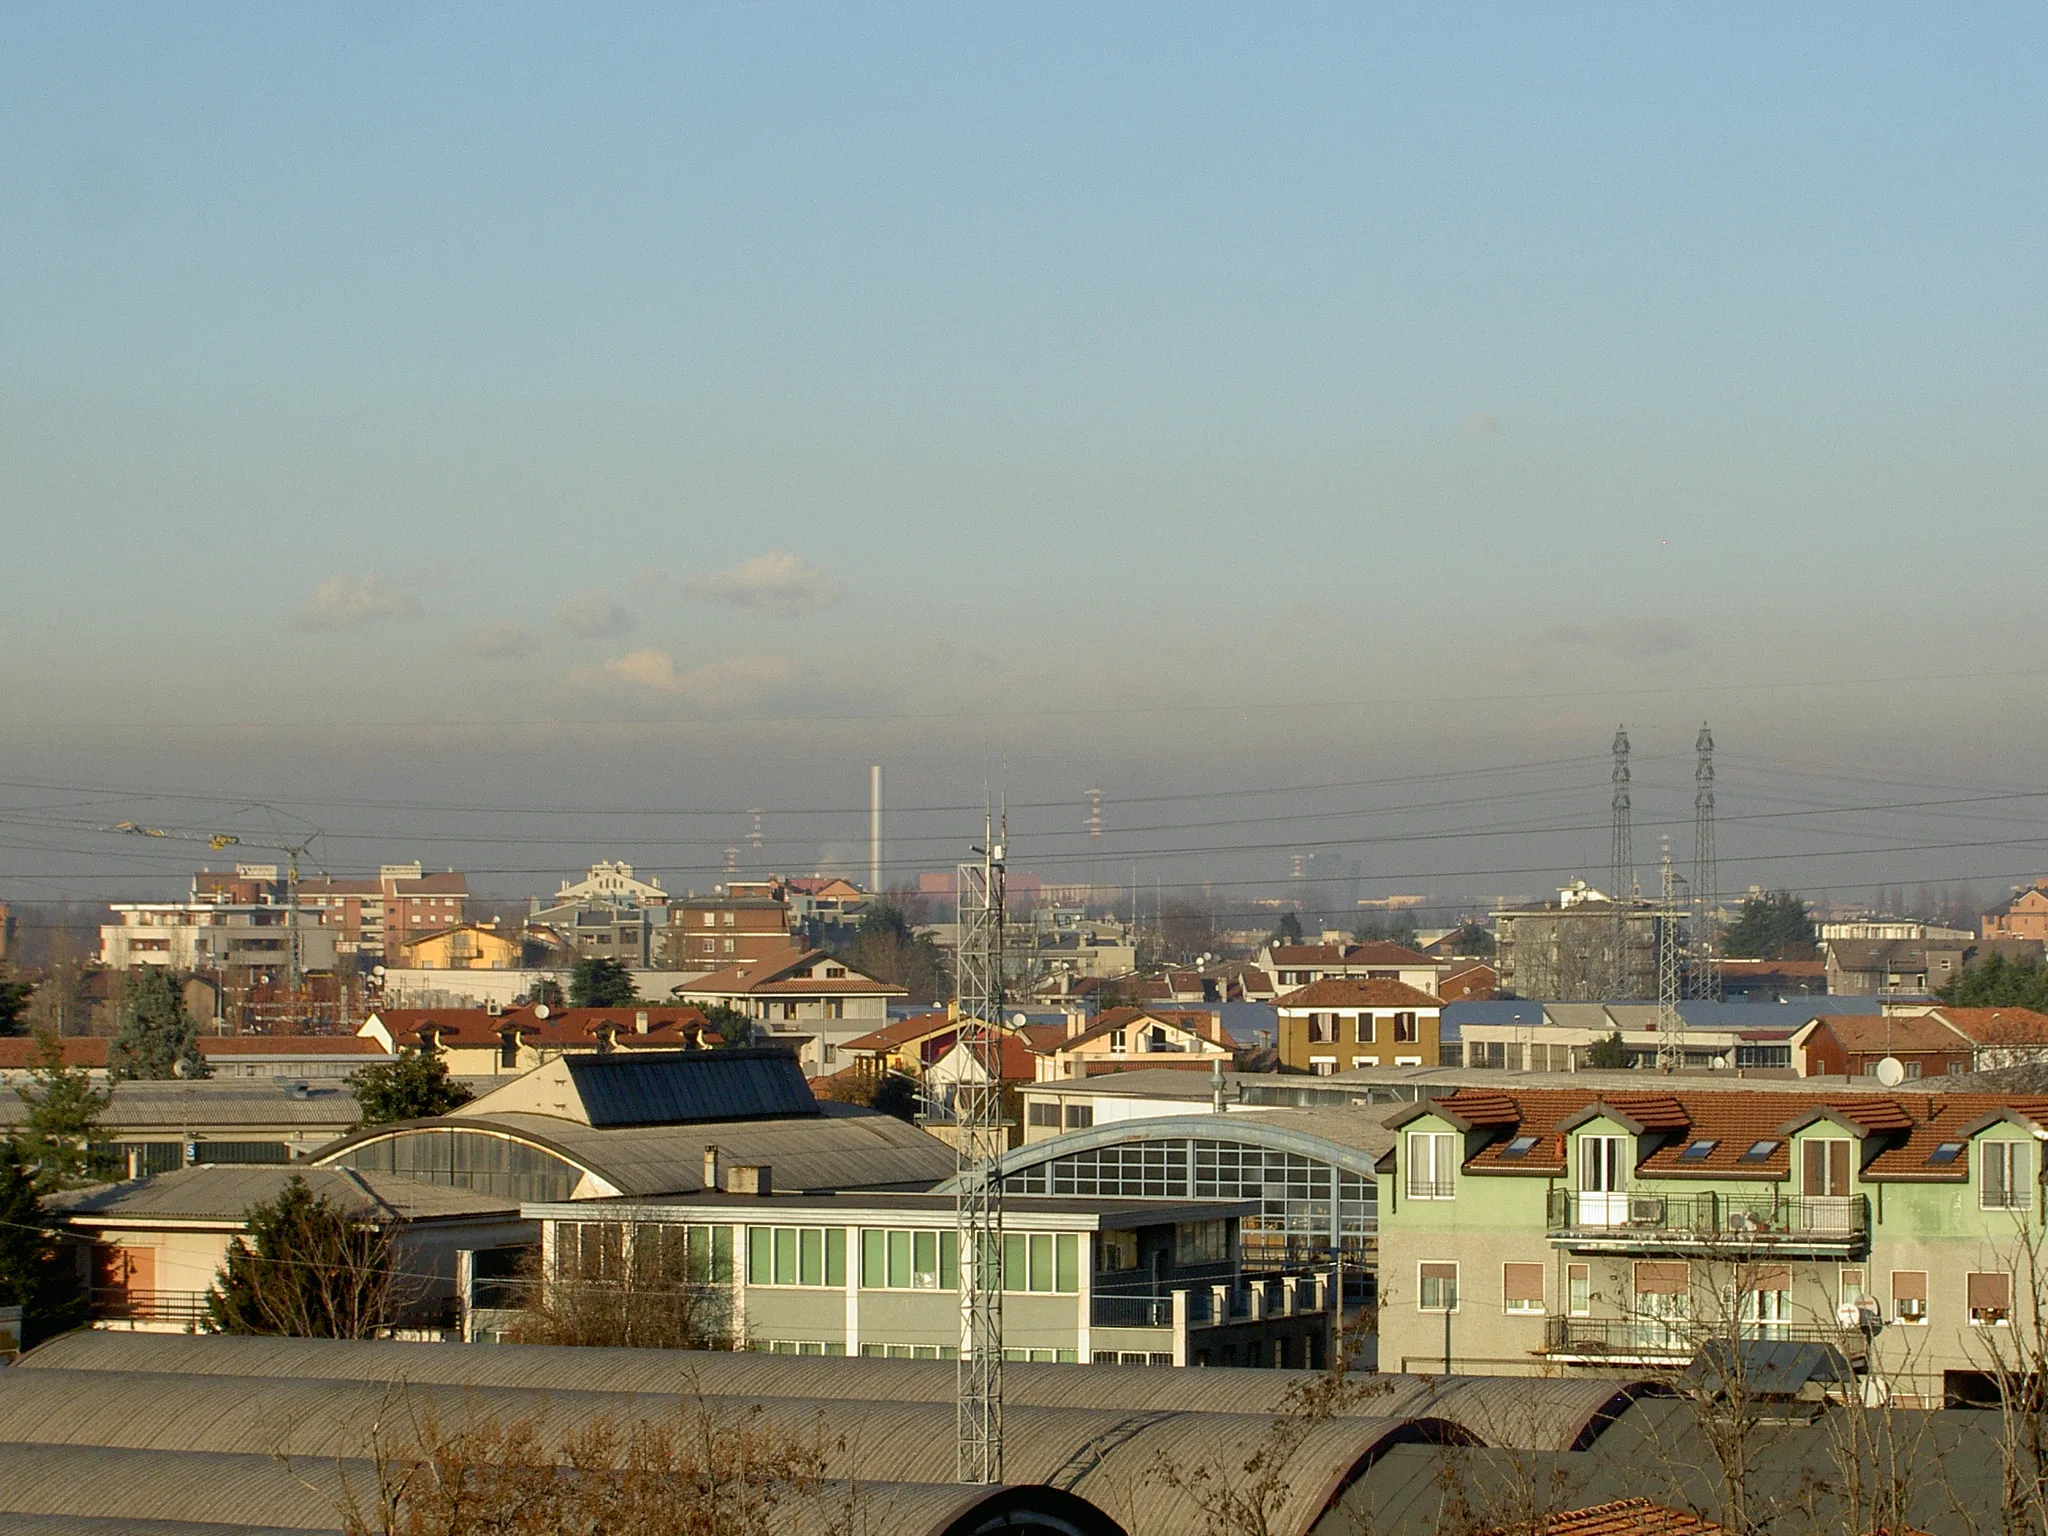 Photo showing: "Settimo Milanese" town, near Milan in Italy, as seen from South.